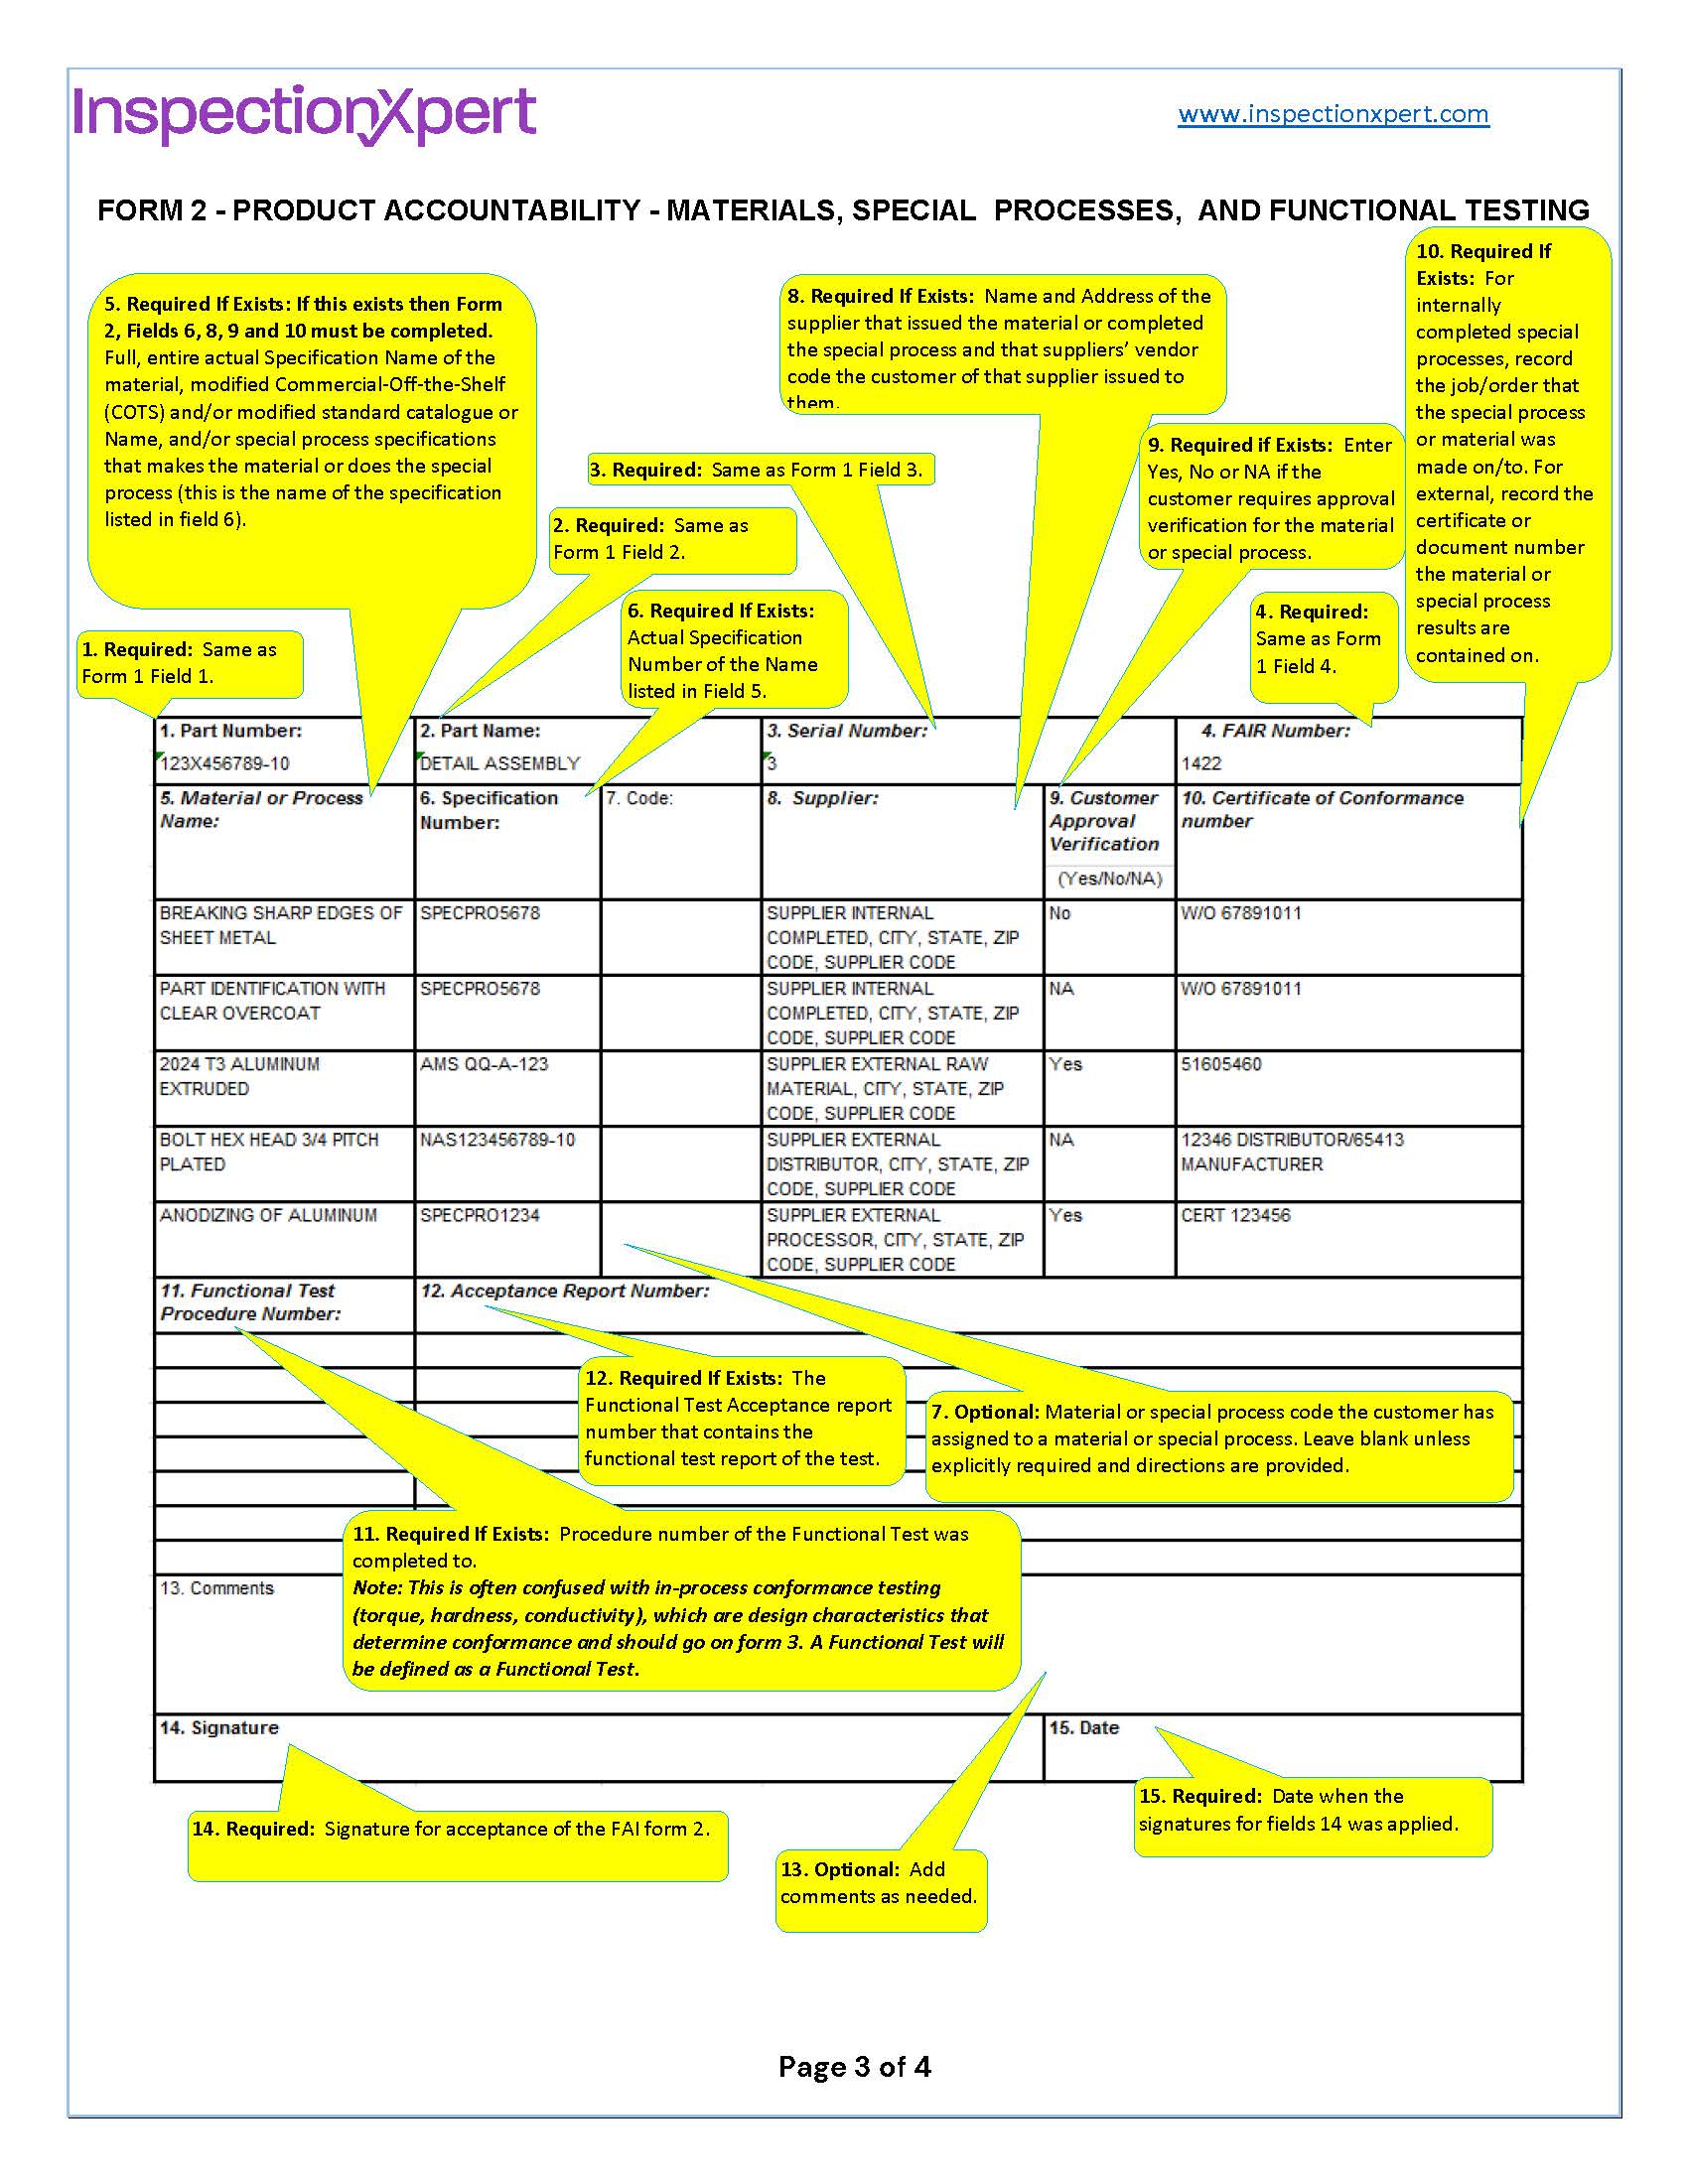 InspectionXpert AS9102 First Article Inspection Guide - Form 2 Product Accountability 